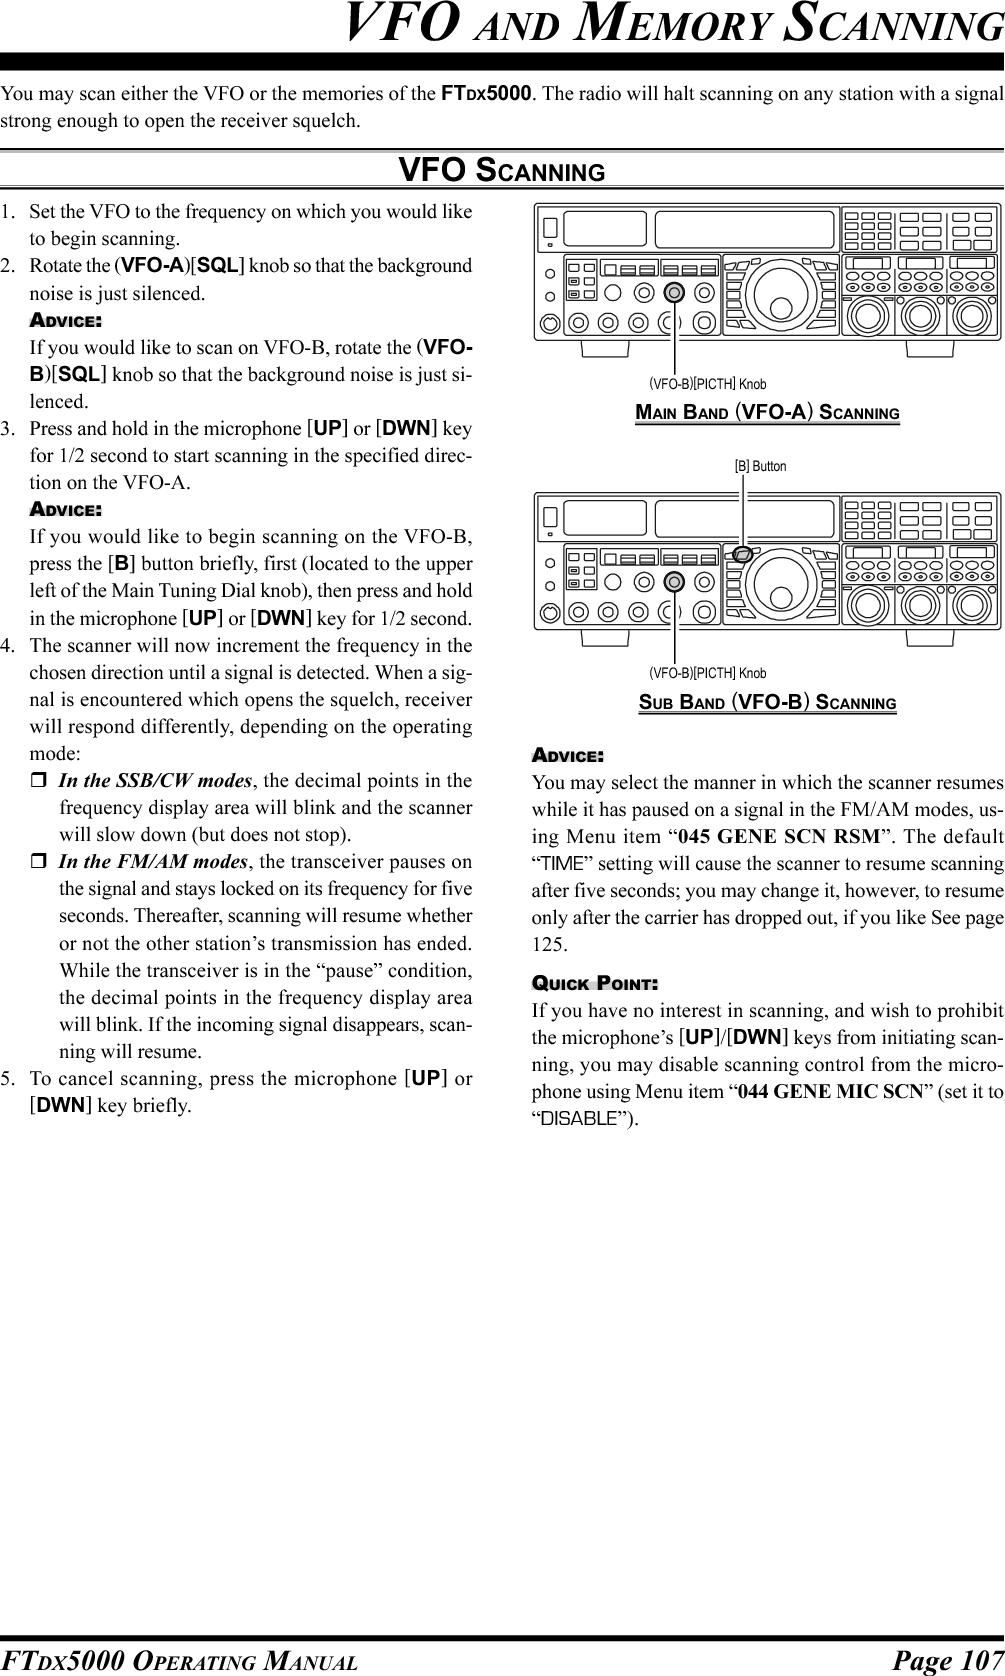 Page 107FTDX5000 OPERATING MANUALYou may scan either the VFO or the memories of the FTDX5000. The radio will halt scanning on any station with a signalstrong enough to open the receiver squelch.VFO SCANNINGVFO AND MEMORY SCANNING1. Set the VFO to the frequency on which you would liketo begin scanning.2. Rotate the (VFO-A)[SQL] knob so that the backgroundnoise is just silenced.ADVICE:If you would like to scan on VFO-B, rotate the (VFO-B)[SQL] knob so that the background noise is just si-lenced.3. Press and hold in the microphone [UP] or [DWN] keyfor 1/2 second to start scanning in the specified direc-tion on the VFO-A.ADVICE:If you would like to begin scanning on the VFO-B,press the [B] button briefly, first (located to the upperleft of the Main Tuning Dial knob), then press and holdin the microphone [UP] or [DWN] key for 1/2 second.4. The scanner will now increment the frequency in thechosen direction until a signal is detected. When a sig-nal is encountered which opens the squelch, receiverwill respond differently, depending on the operatingmode:In the SSB/CW modes, the decimal points in thefrequency display area will blink and the scannerwill slow down (but does not stop).In the FM/AM modes, the transceiver pauses onthe signal and stays locked on its frequency for fiveseconds. Thereafter, scanning will resume whetheror not the other station’s transmission has ended.While the transceiver is in the “pause” condition,the decimal points in the frequency display areawill blink. If the incoming signal disappears, scan-ning will resume.5. To cancel scanning, press the microphone [UP] or[DWN] key briefly.MAIN BAND (VFO-A) SCANNINGSUB BAND (VFO-B) SCANNING(VFO-B)[PICTH] Knob[B] Button(VFO-B)[PICTH] KnobADVICE:You may select the manner in which the scanner resumeswhile it has paused on a signal in the FM/AM modes, us-ing Menu item “045 GENE SCN RSM”. The default“TIME” setting will cause the scanner to resume scanningafter five seconds; you may change it, however, to resumeonly after the carrier has dropped out, if you like See page125.QUICK POINT:If you have no interest in scanning, and wish to prohibitthe microphone’s [UP]/[DWN] keys from initiating scan-ning, you may disable scanning control from the micro-phone using Menu item “044 GENE MIC SCN” (set it to“DISABLE”).